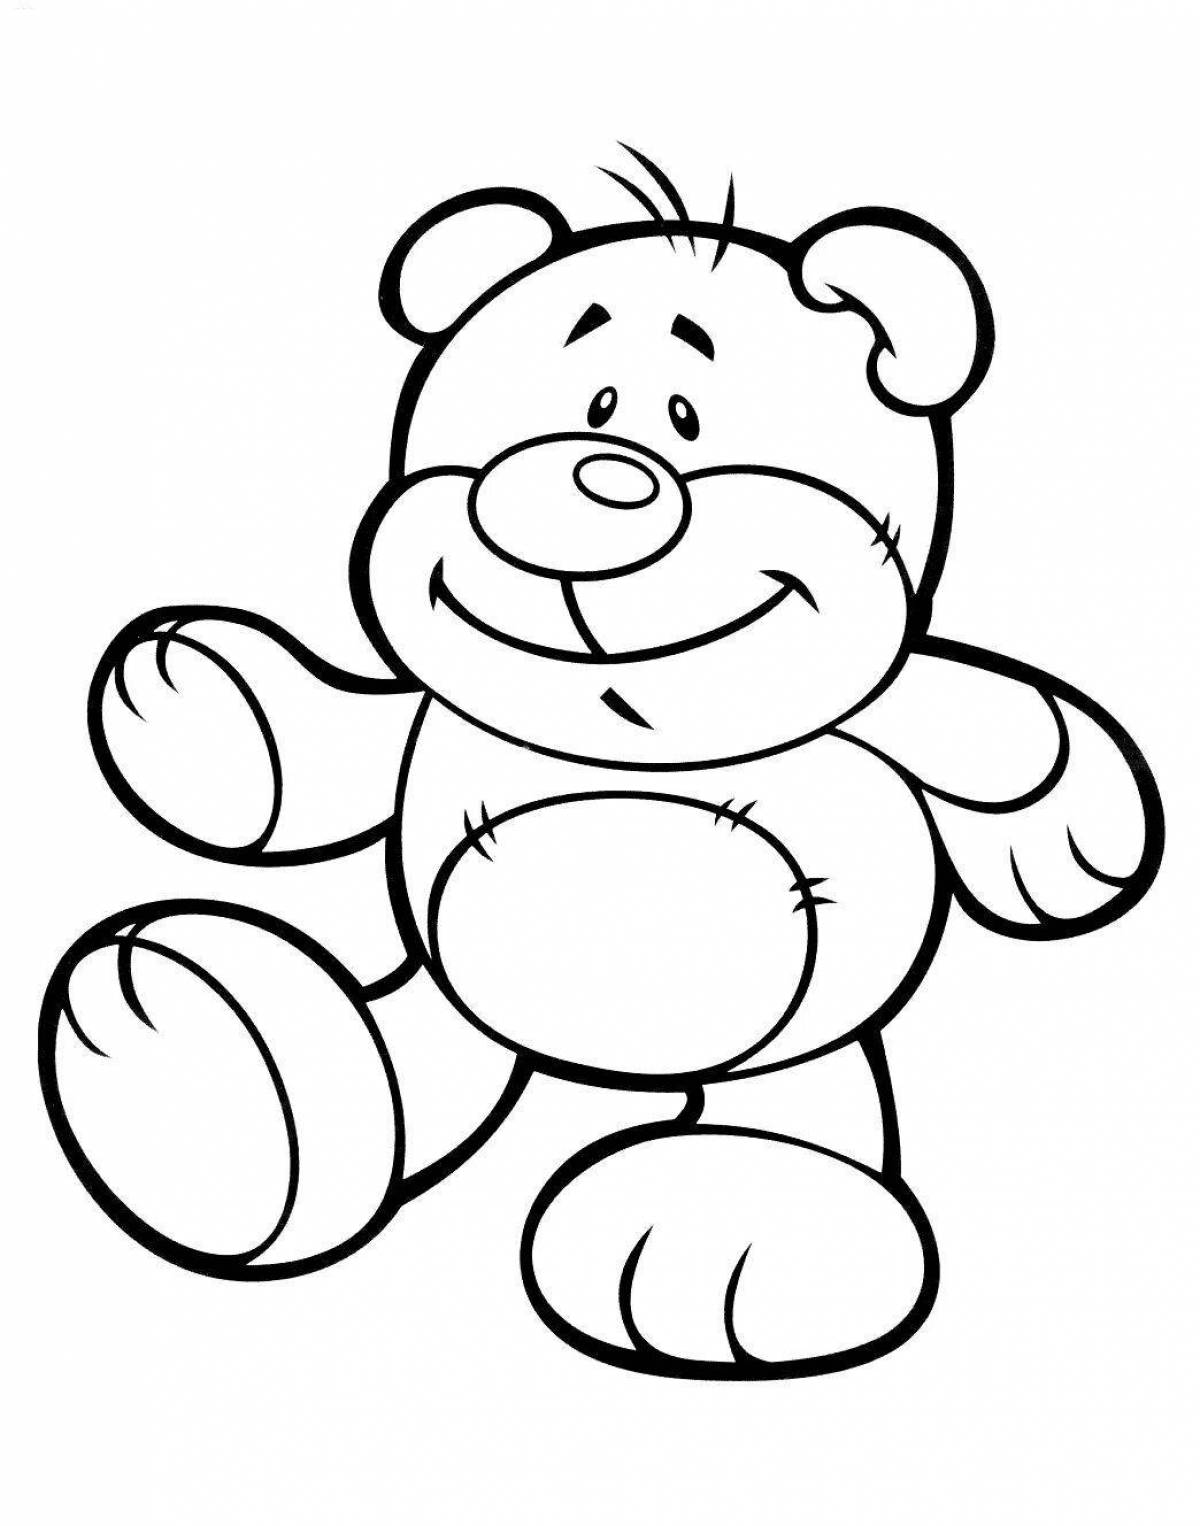 Glittering teddy bear coloring page